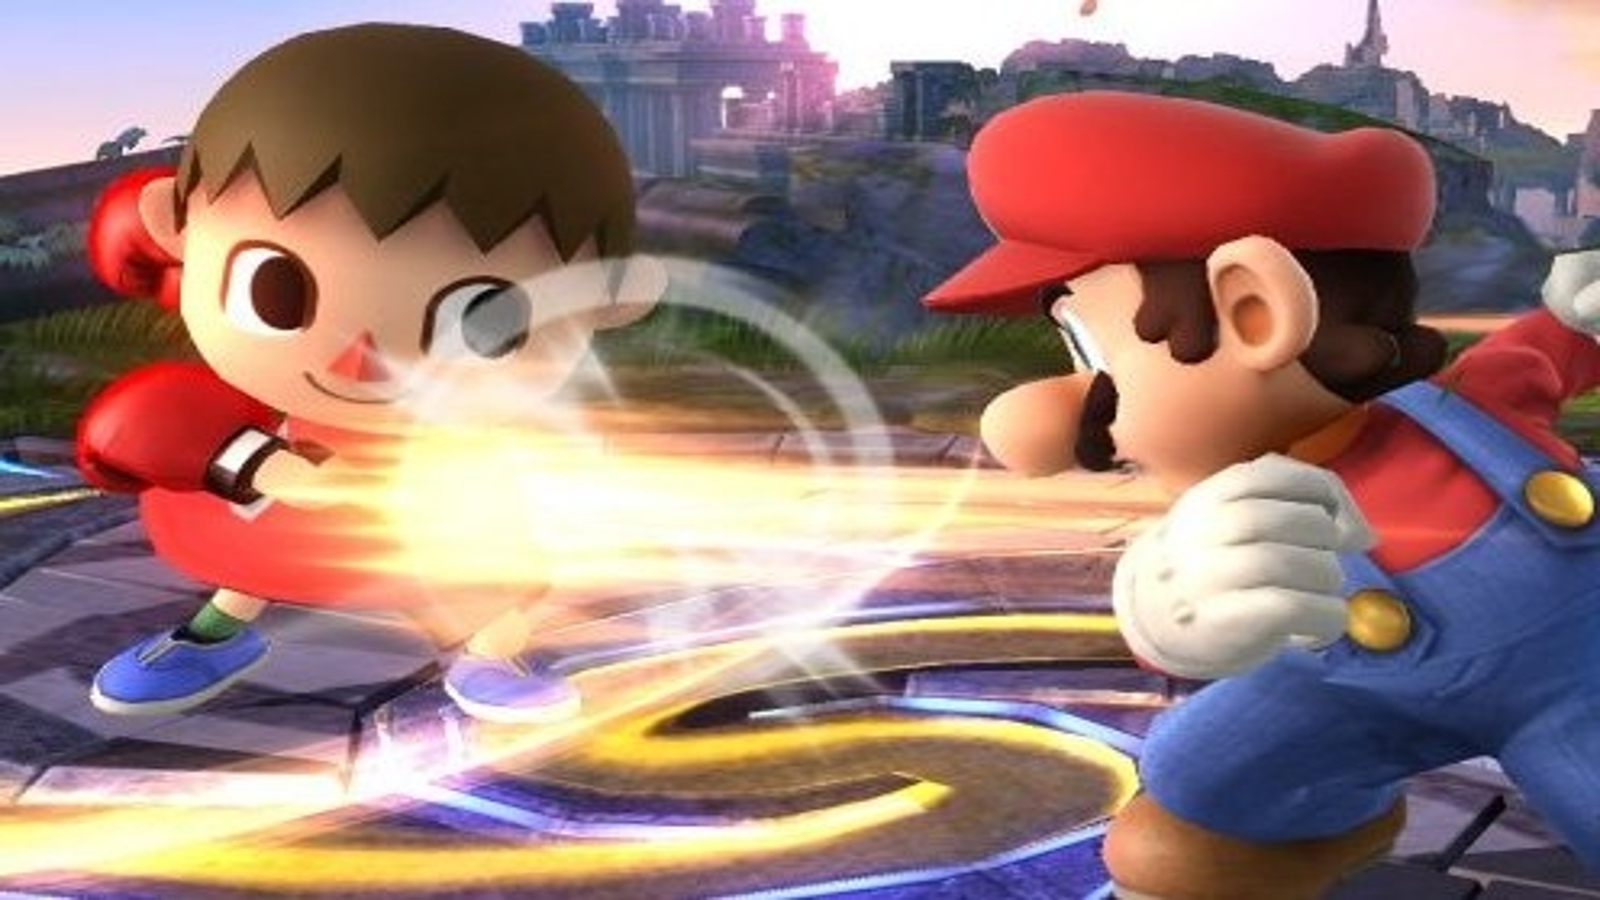 Wii U sales skyrocket, and Nintendo expects more thanks to Super Smash  Bros. - Polygon